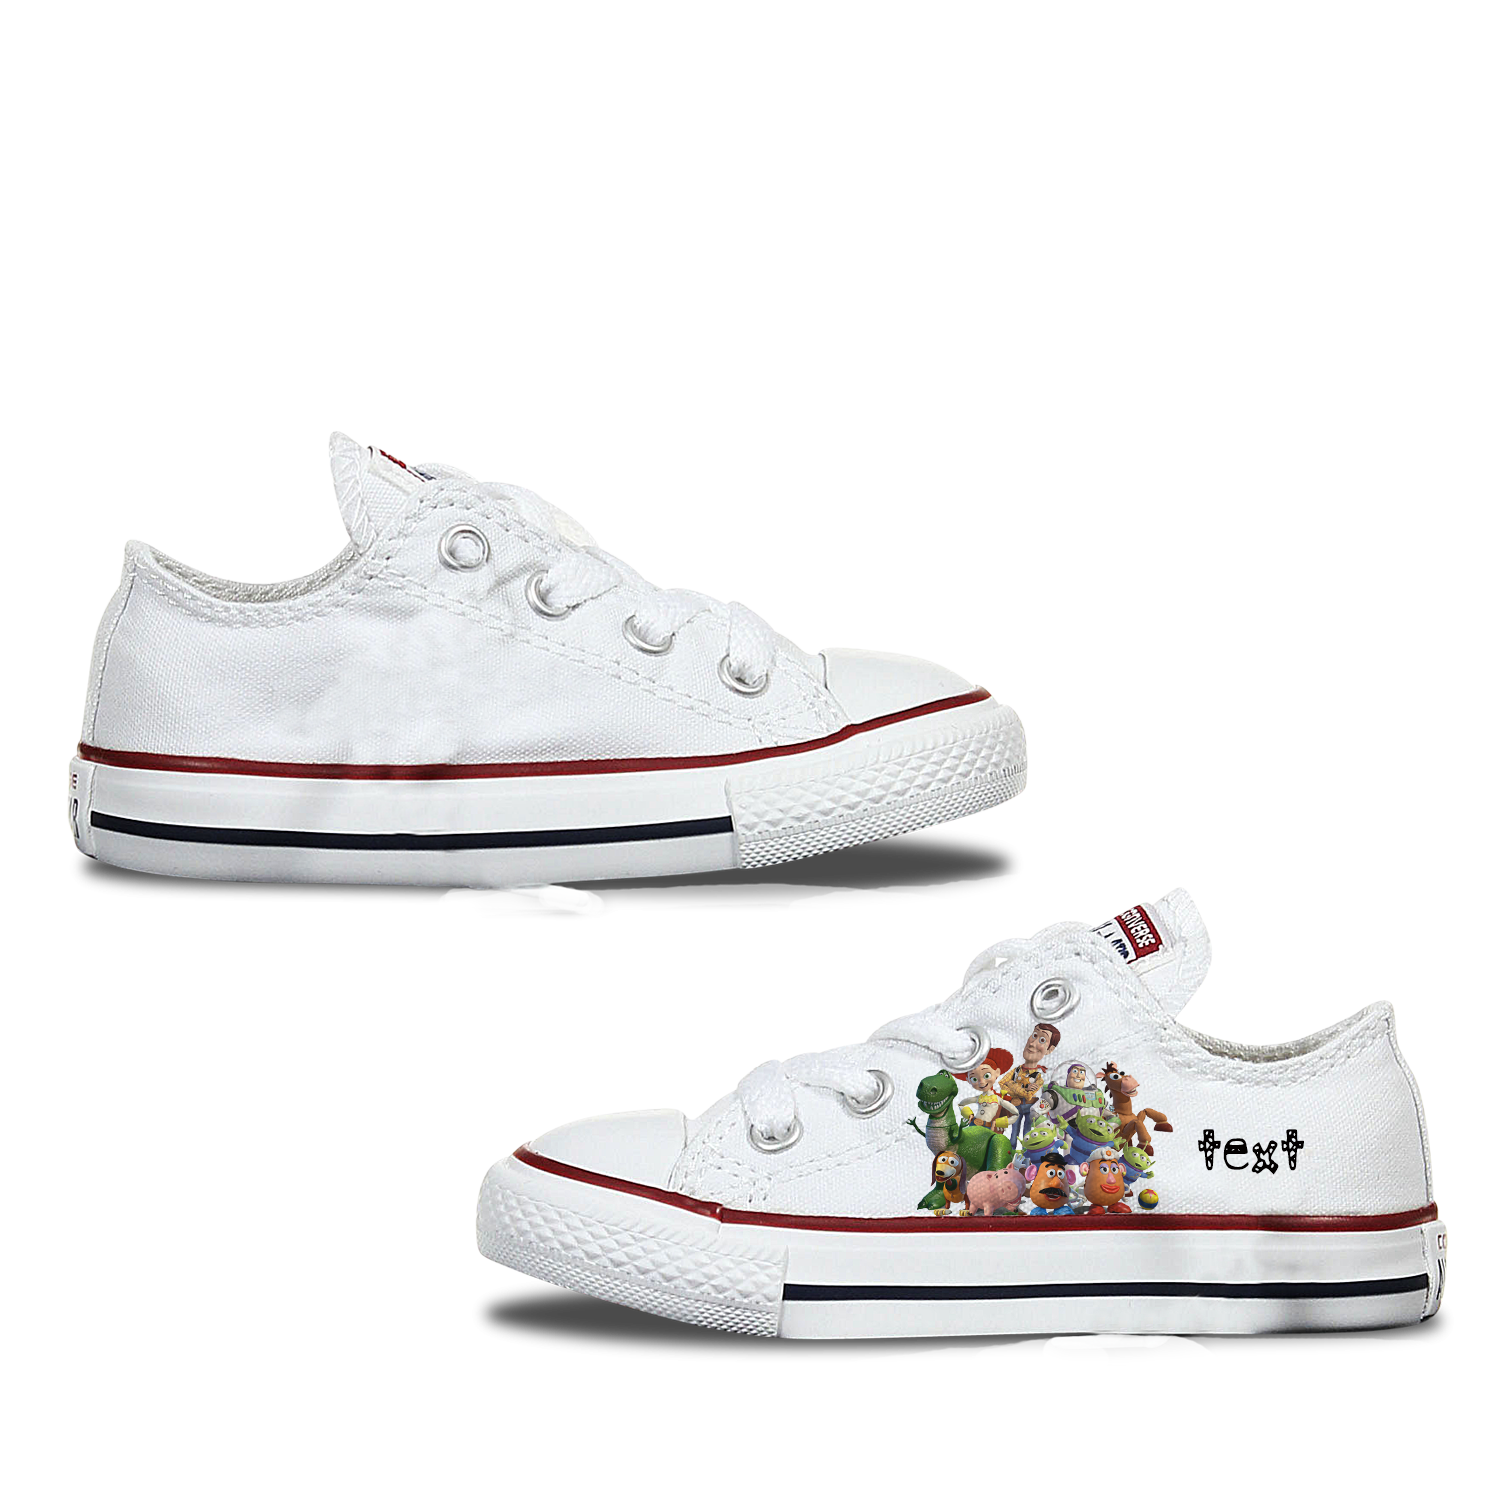 converse toy story